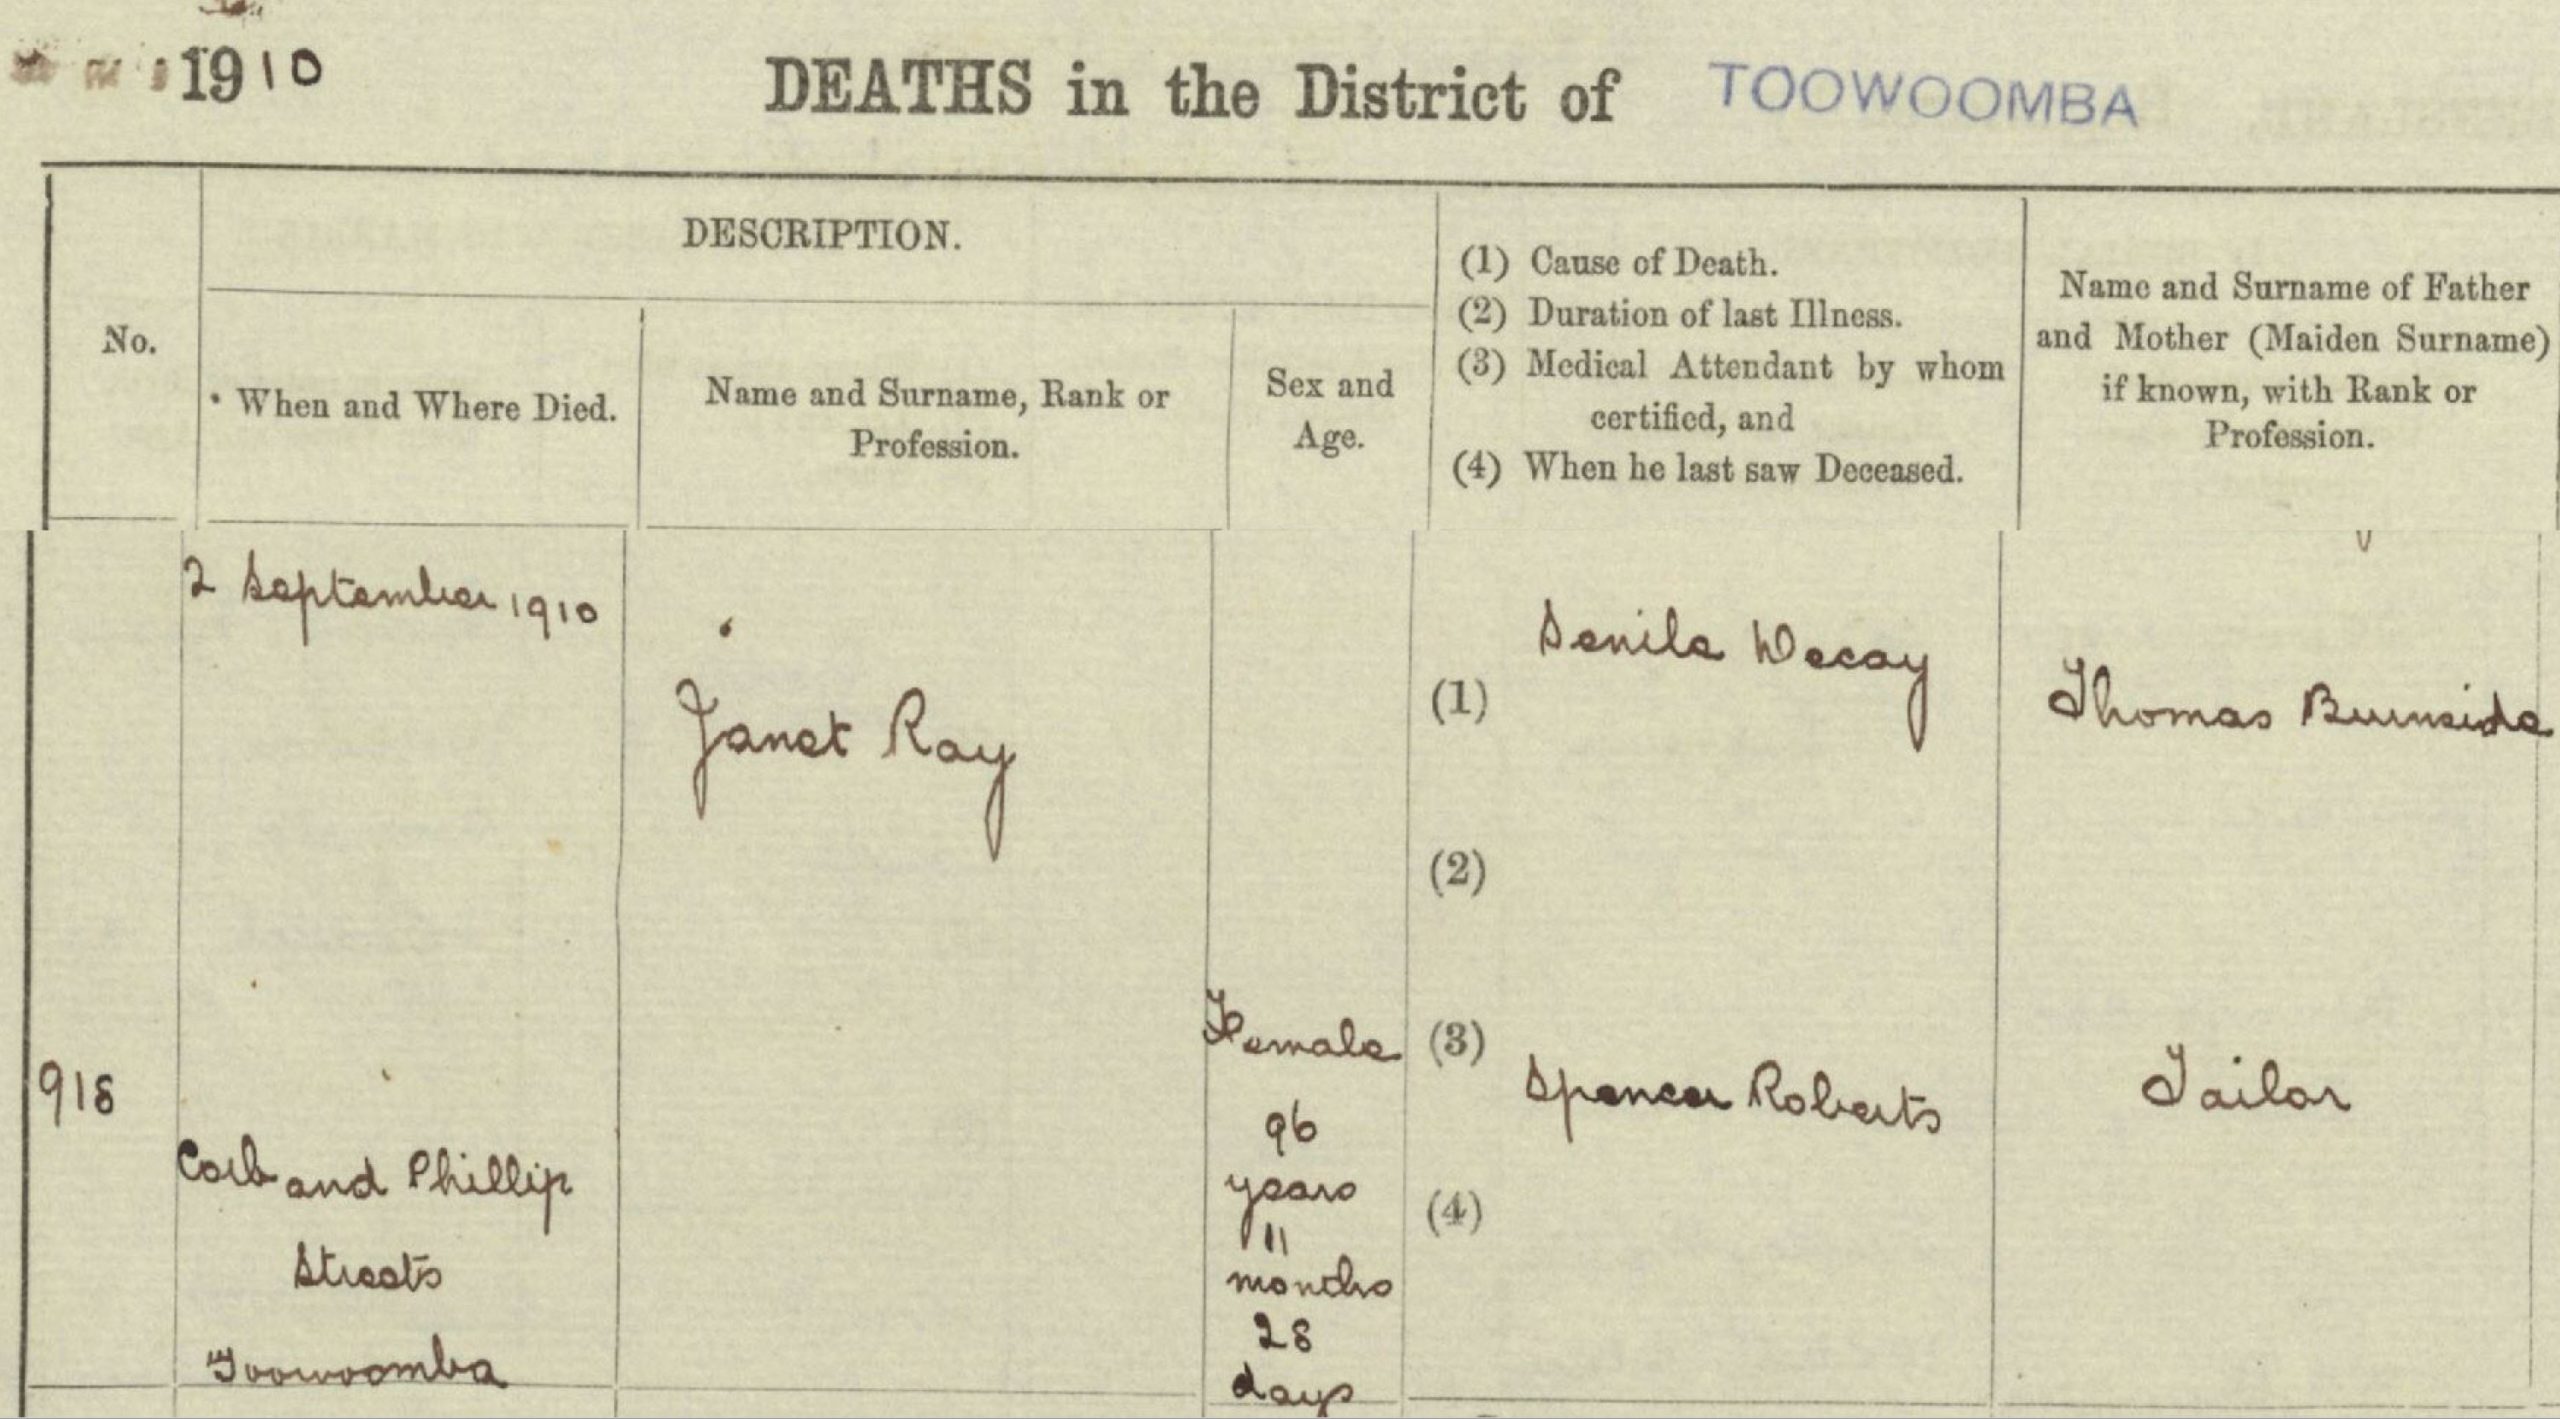 Historical death image of Jane (Janet) Ray, died 1910 in Toowoomba. Source: Queensland Registry of Births, Deaths and Marriages, Reg. No. 1915/C/317.